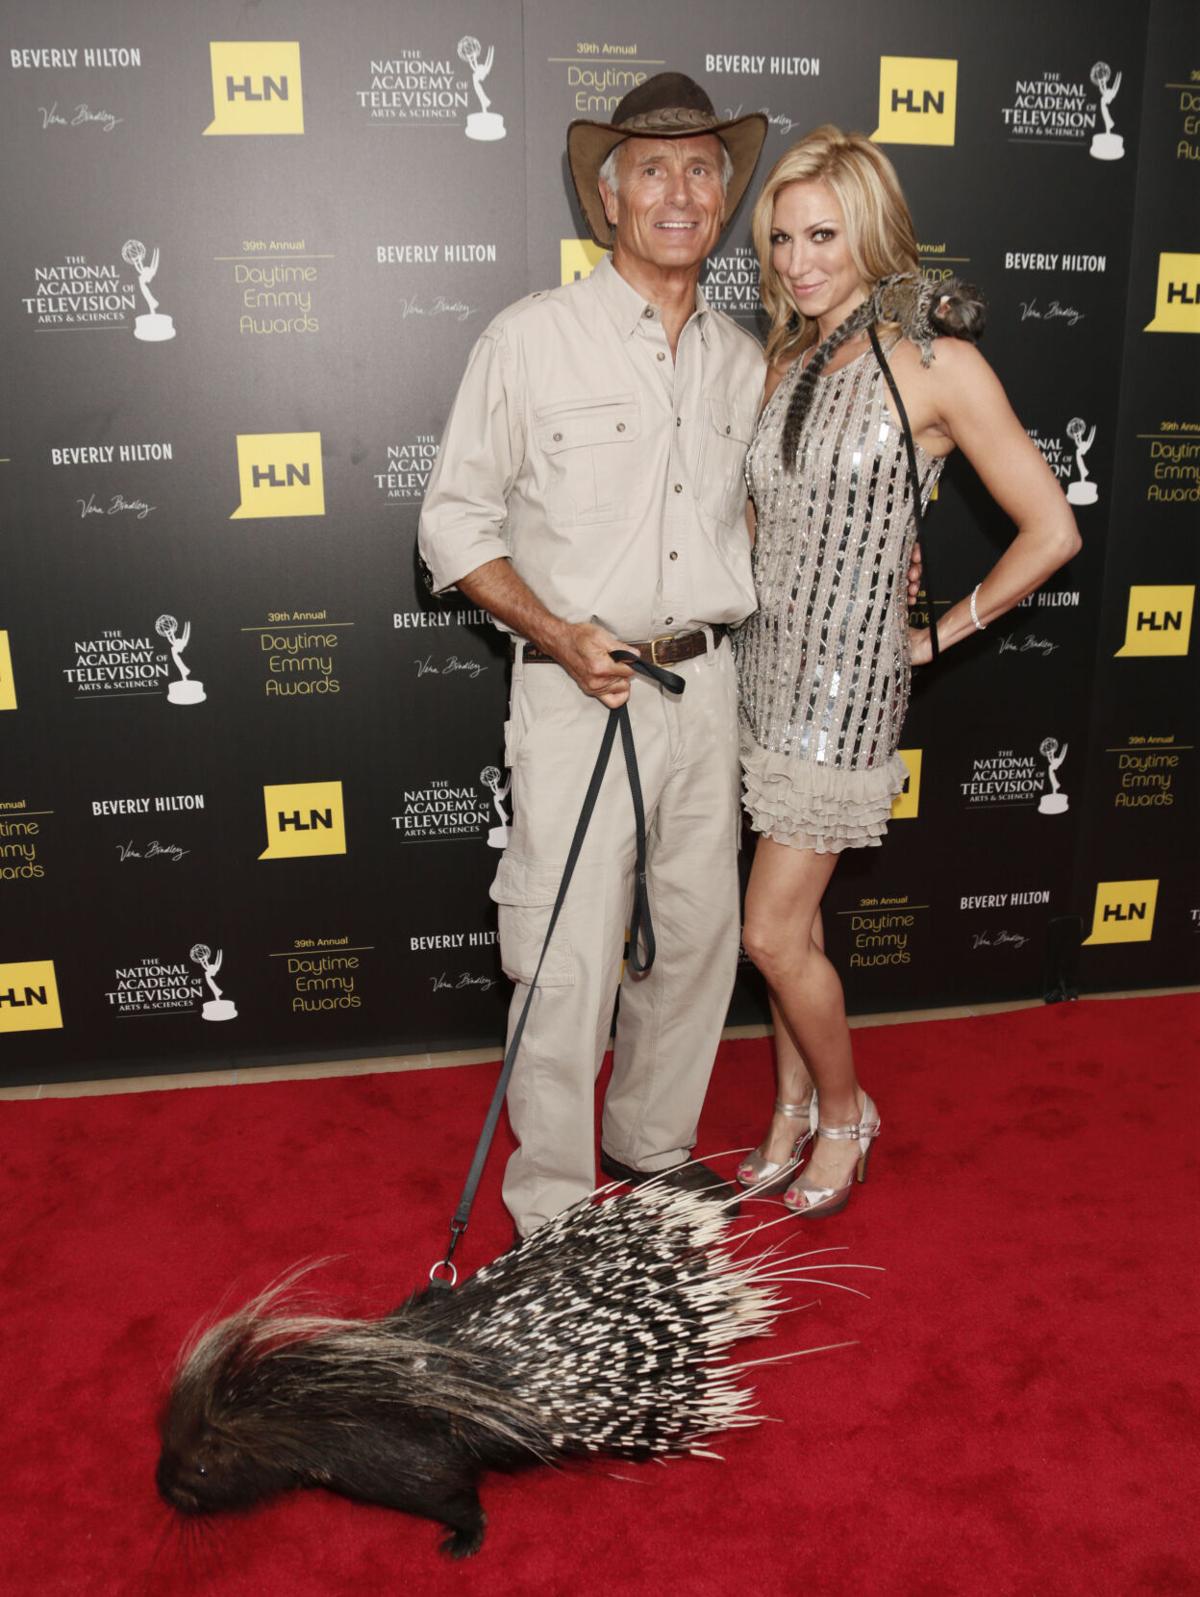 Celeb zookeeper Jack Hanna doesn't know he has Alzheimer's - Los